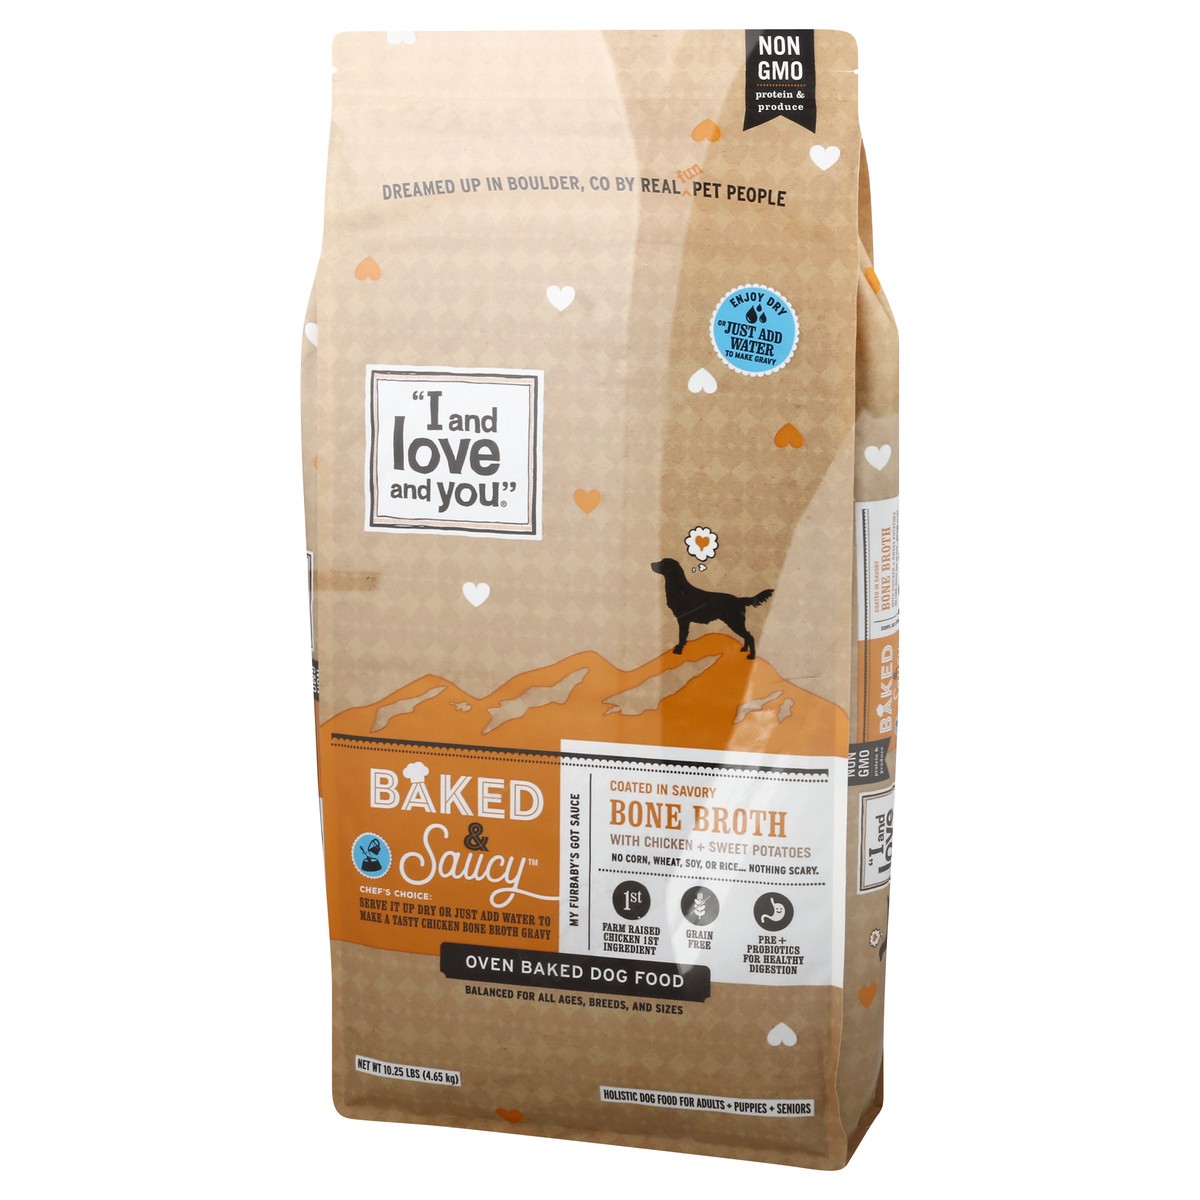 slide 4 of 9, I and Love and You Baked & Saucy Oven Baked Bone Broth with Chicken + Sweet Potatoes Dog Food 10.25 lb, 10.25 lb